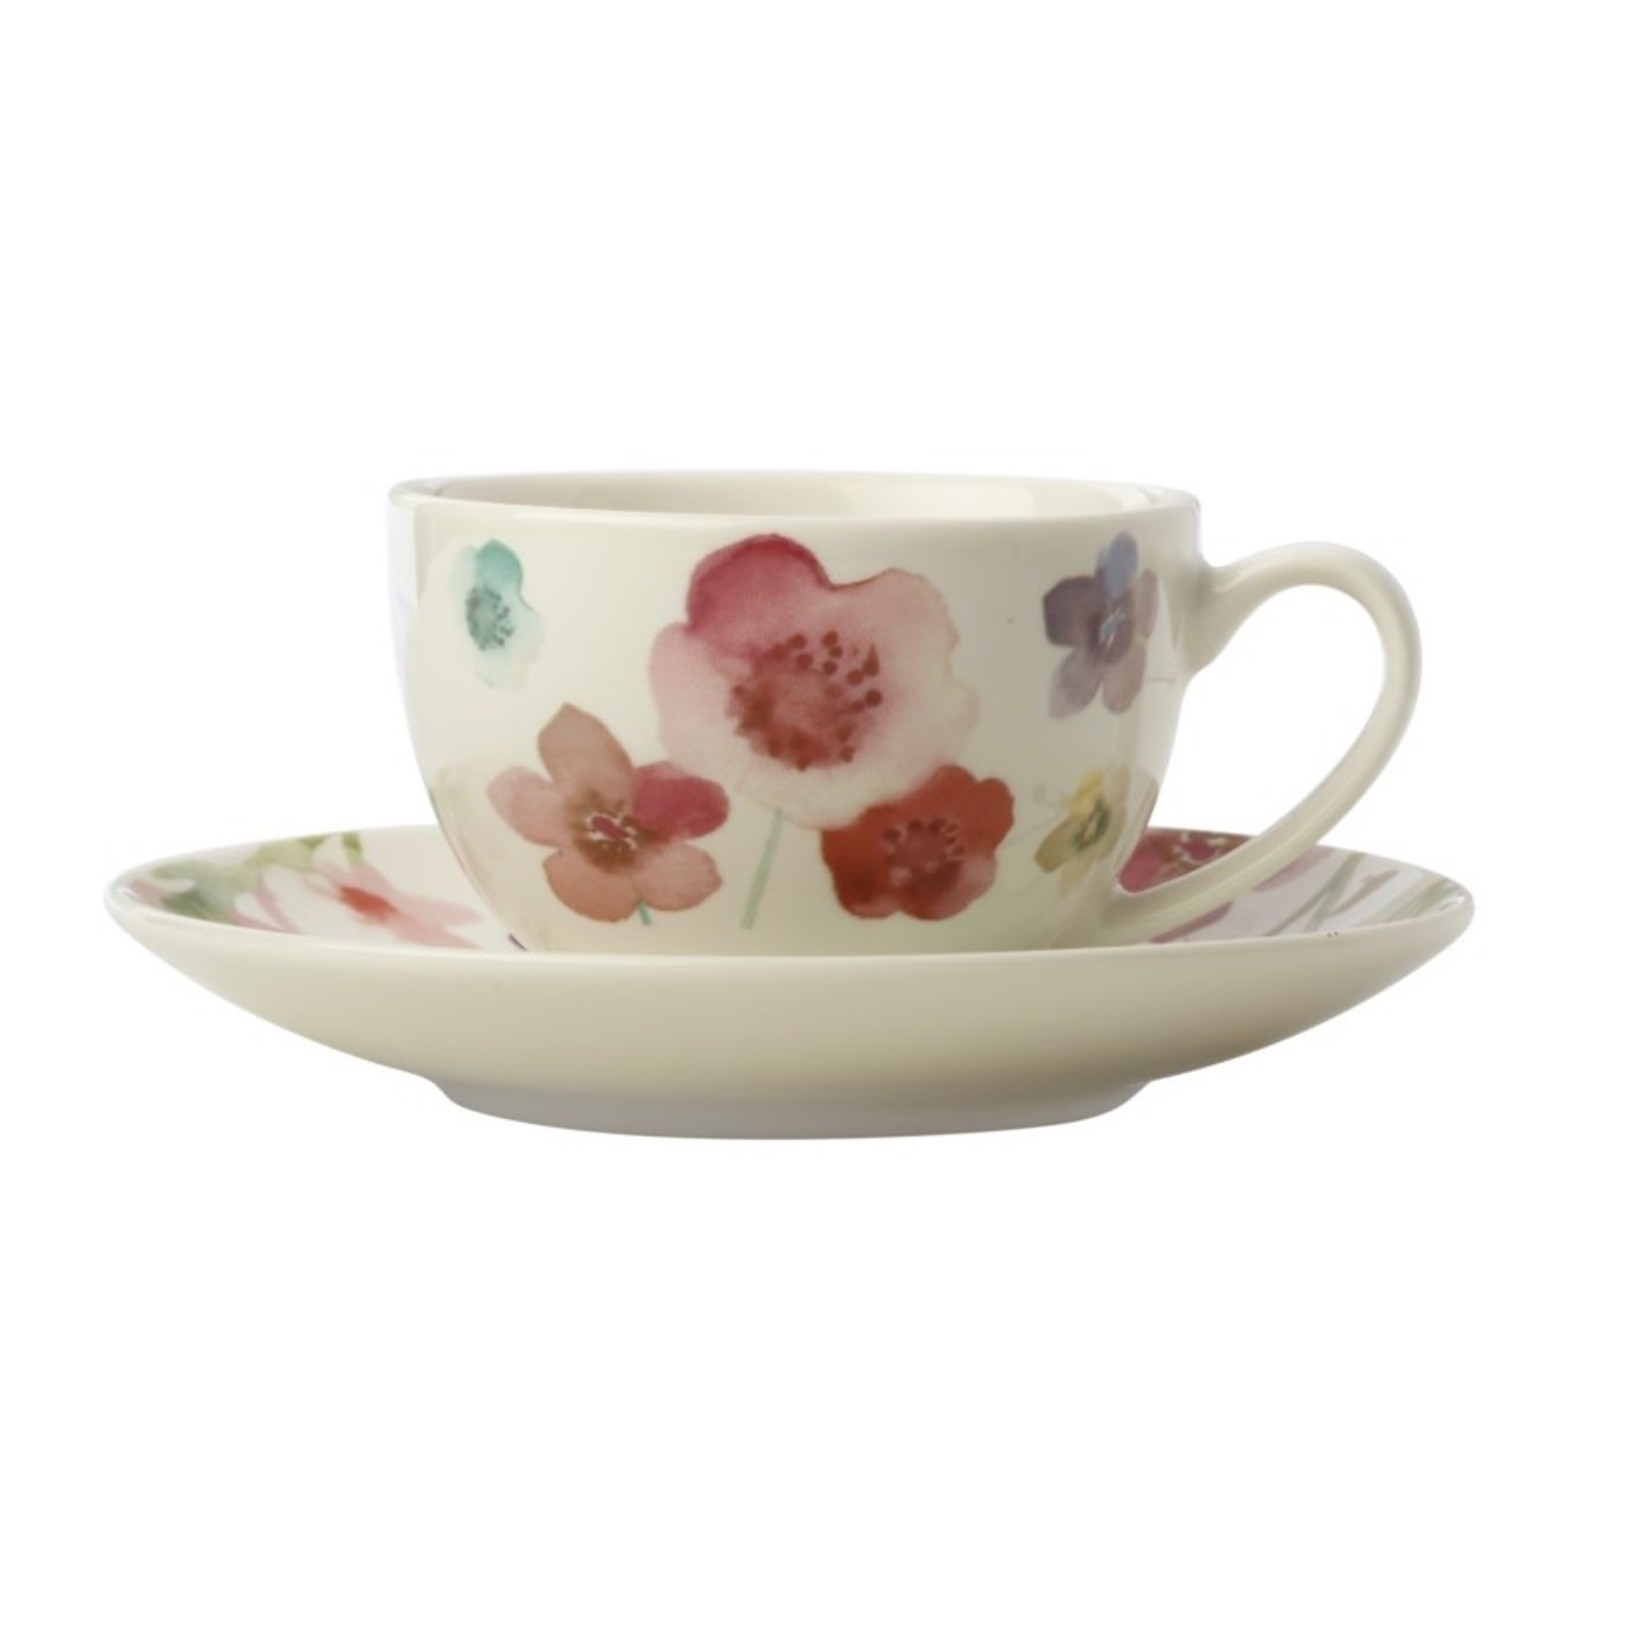 MAXWELL WILLIAMS Wildwood -Demi Cups & Saucer - Kitchen Therapy